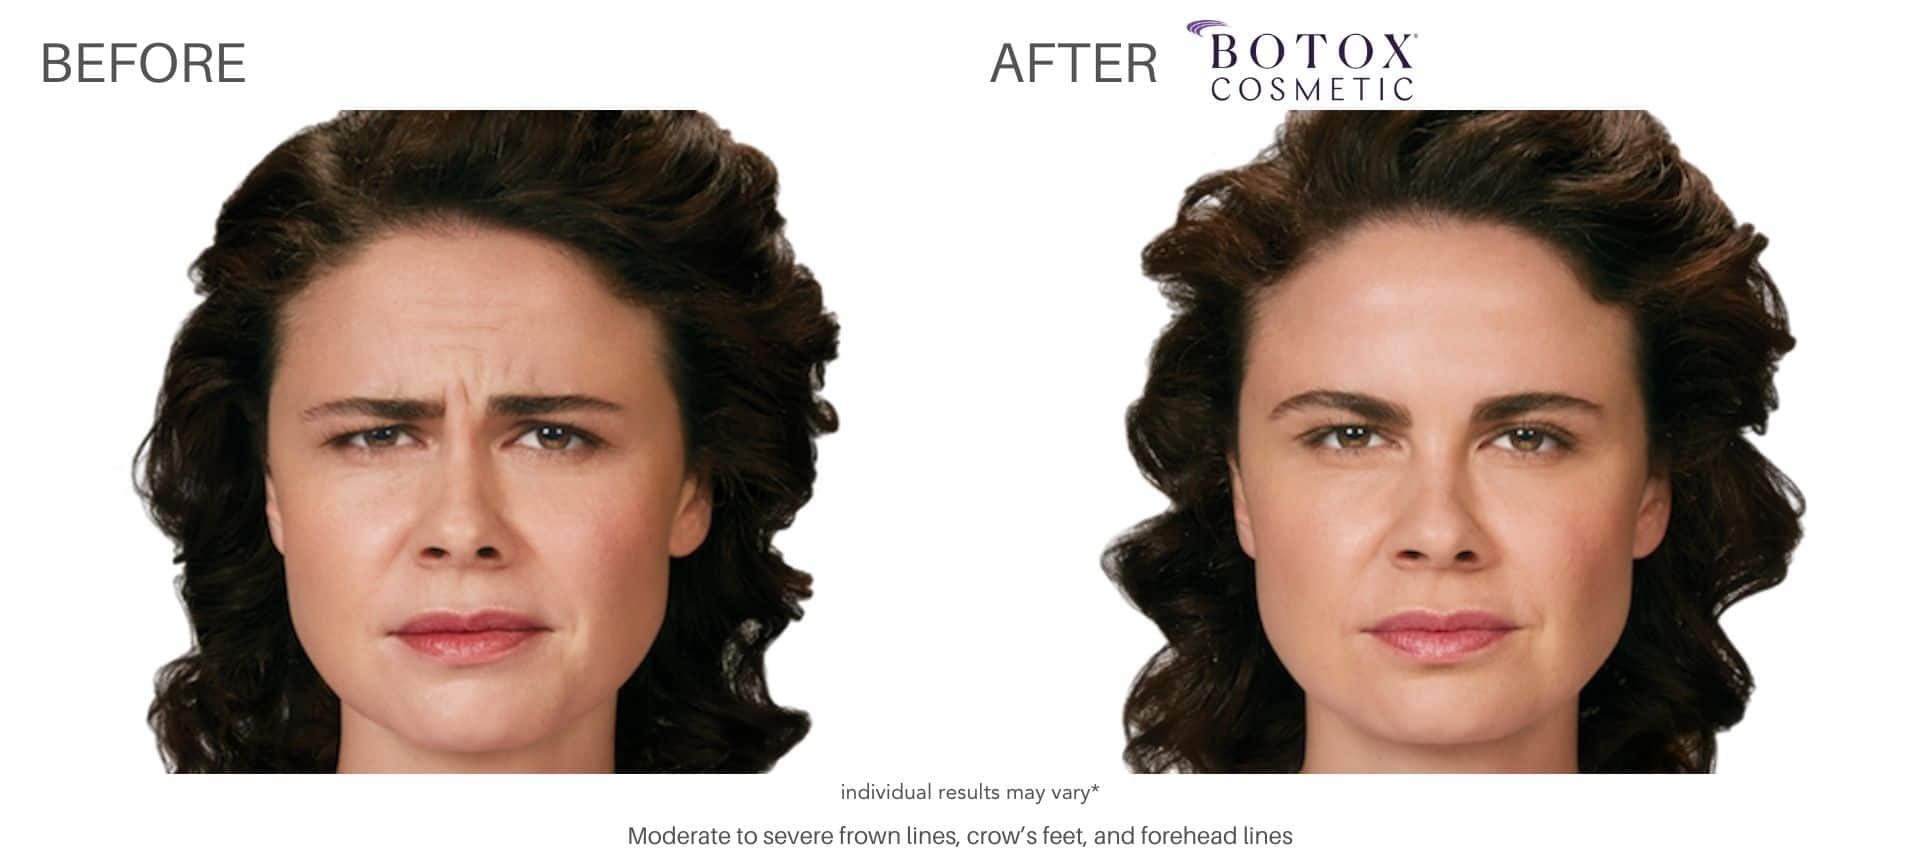 botox injectables before and after treatment with Dr. Saimovici